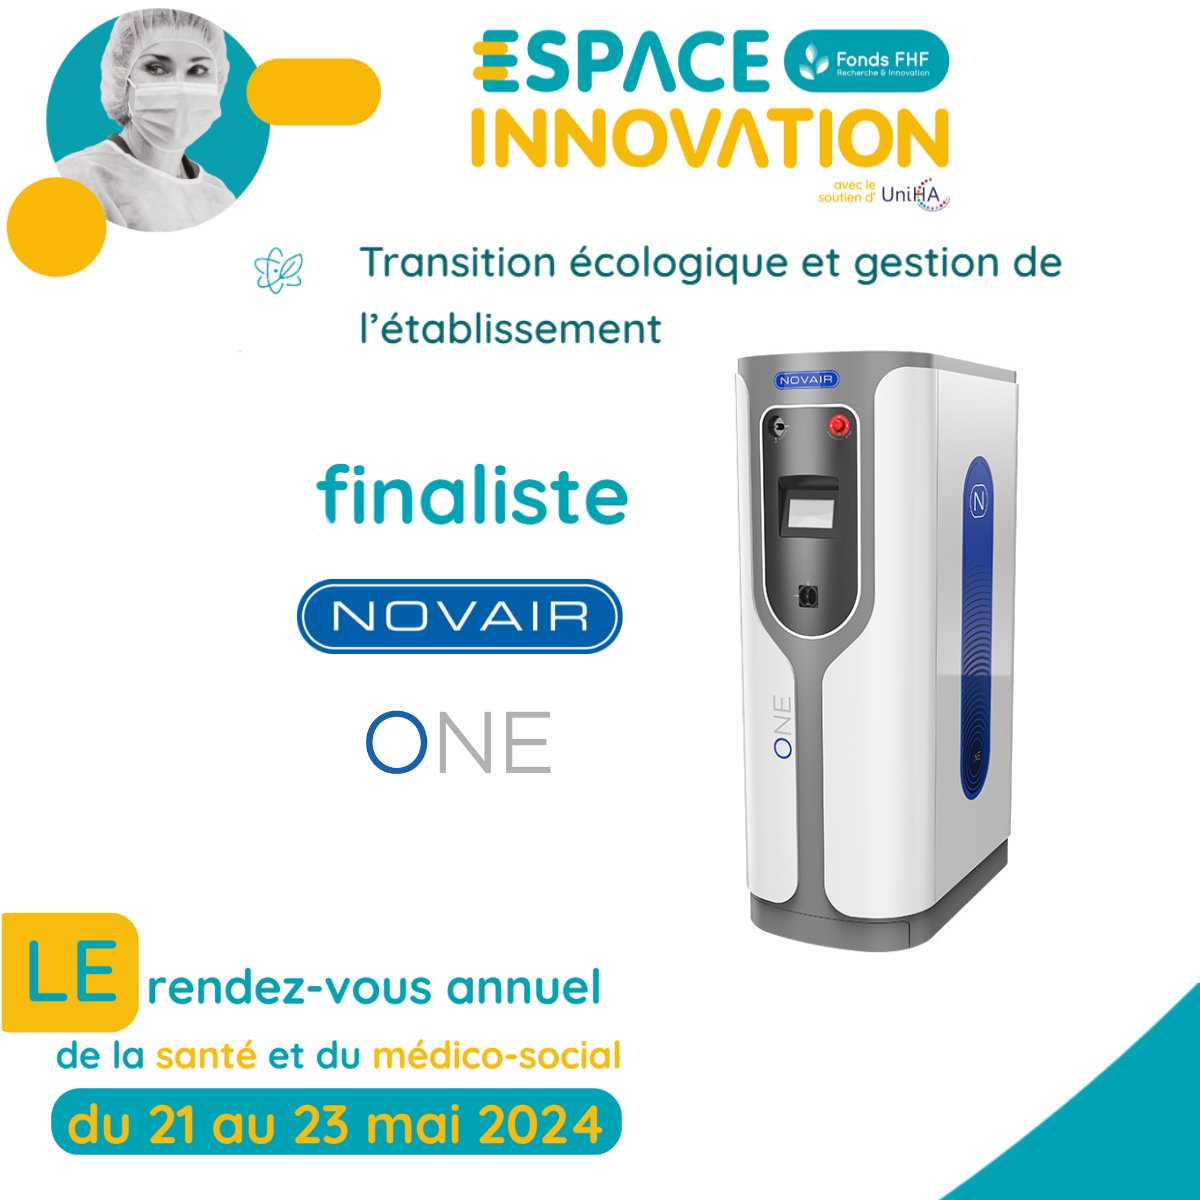 NOVAIR is proud to be a finalist in the Fonds FHF Espace Innovation at SantExpo 2024